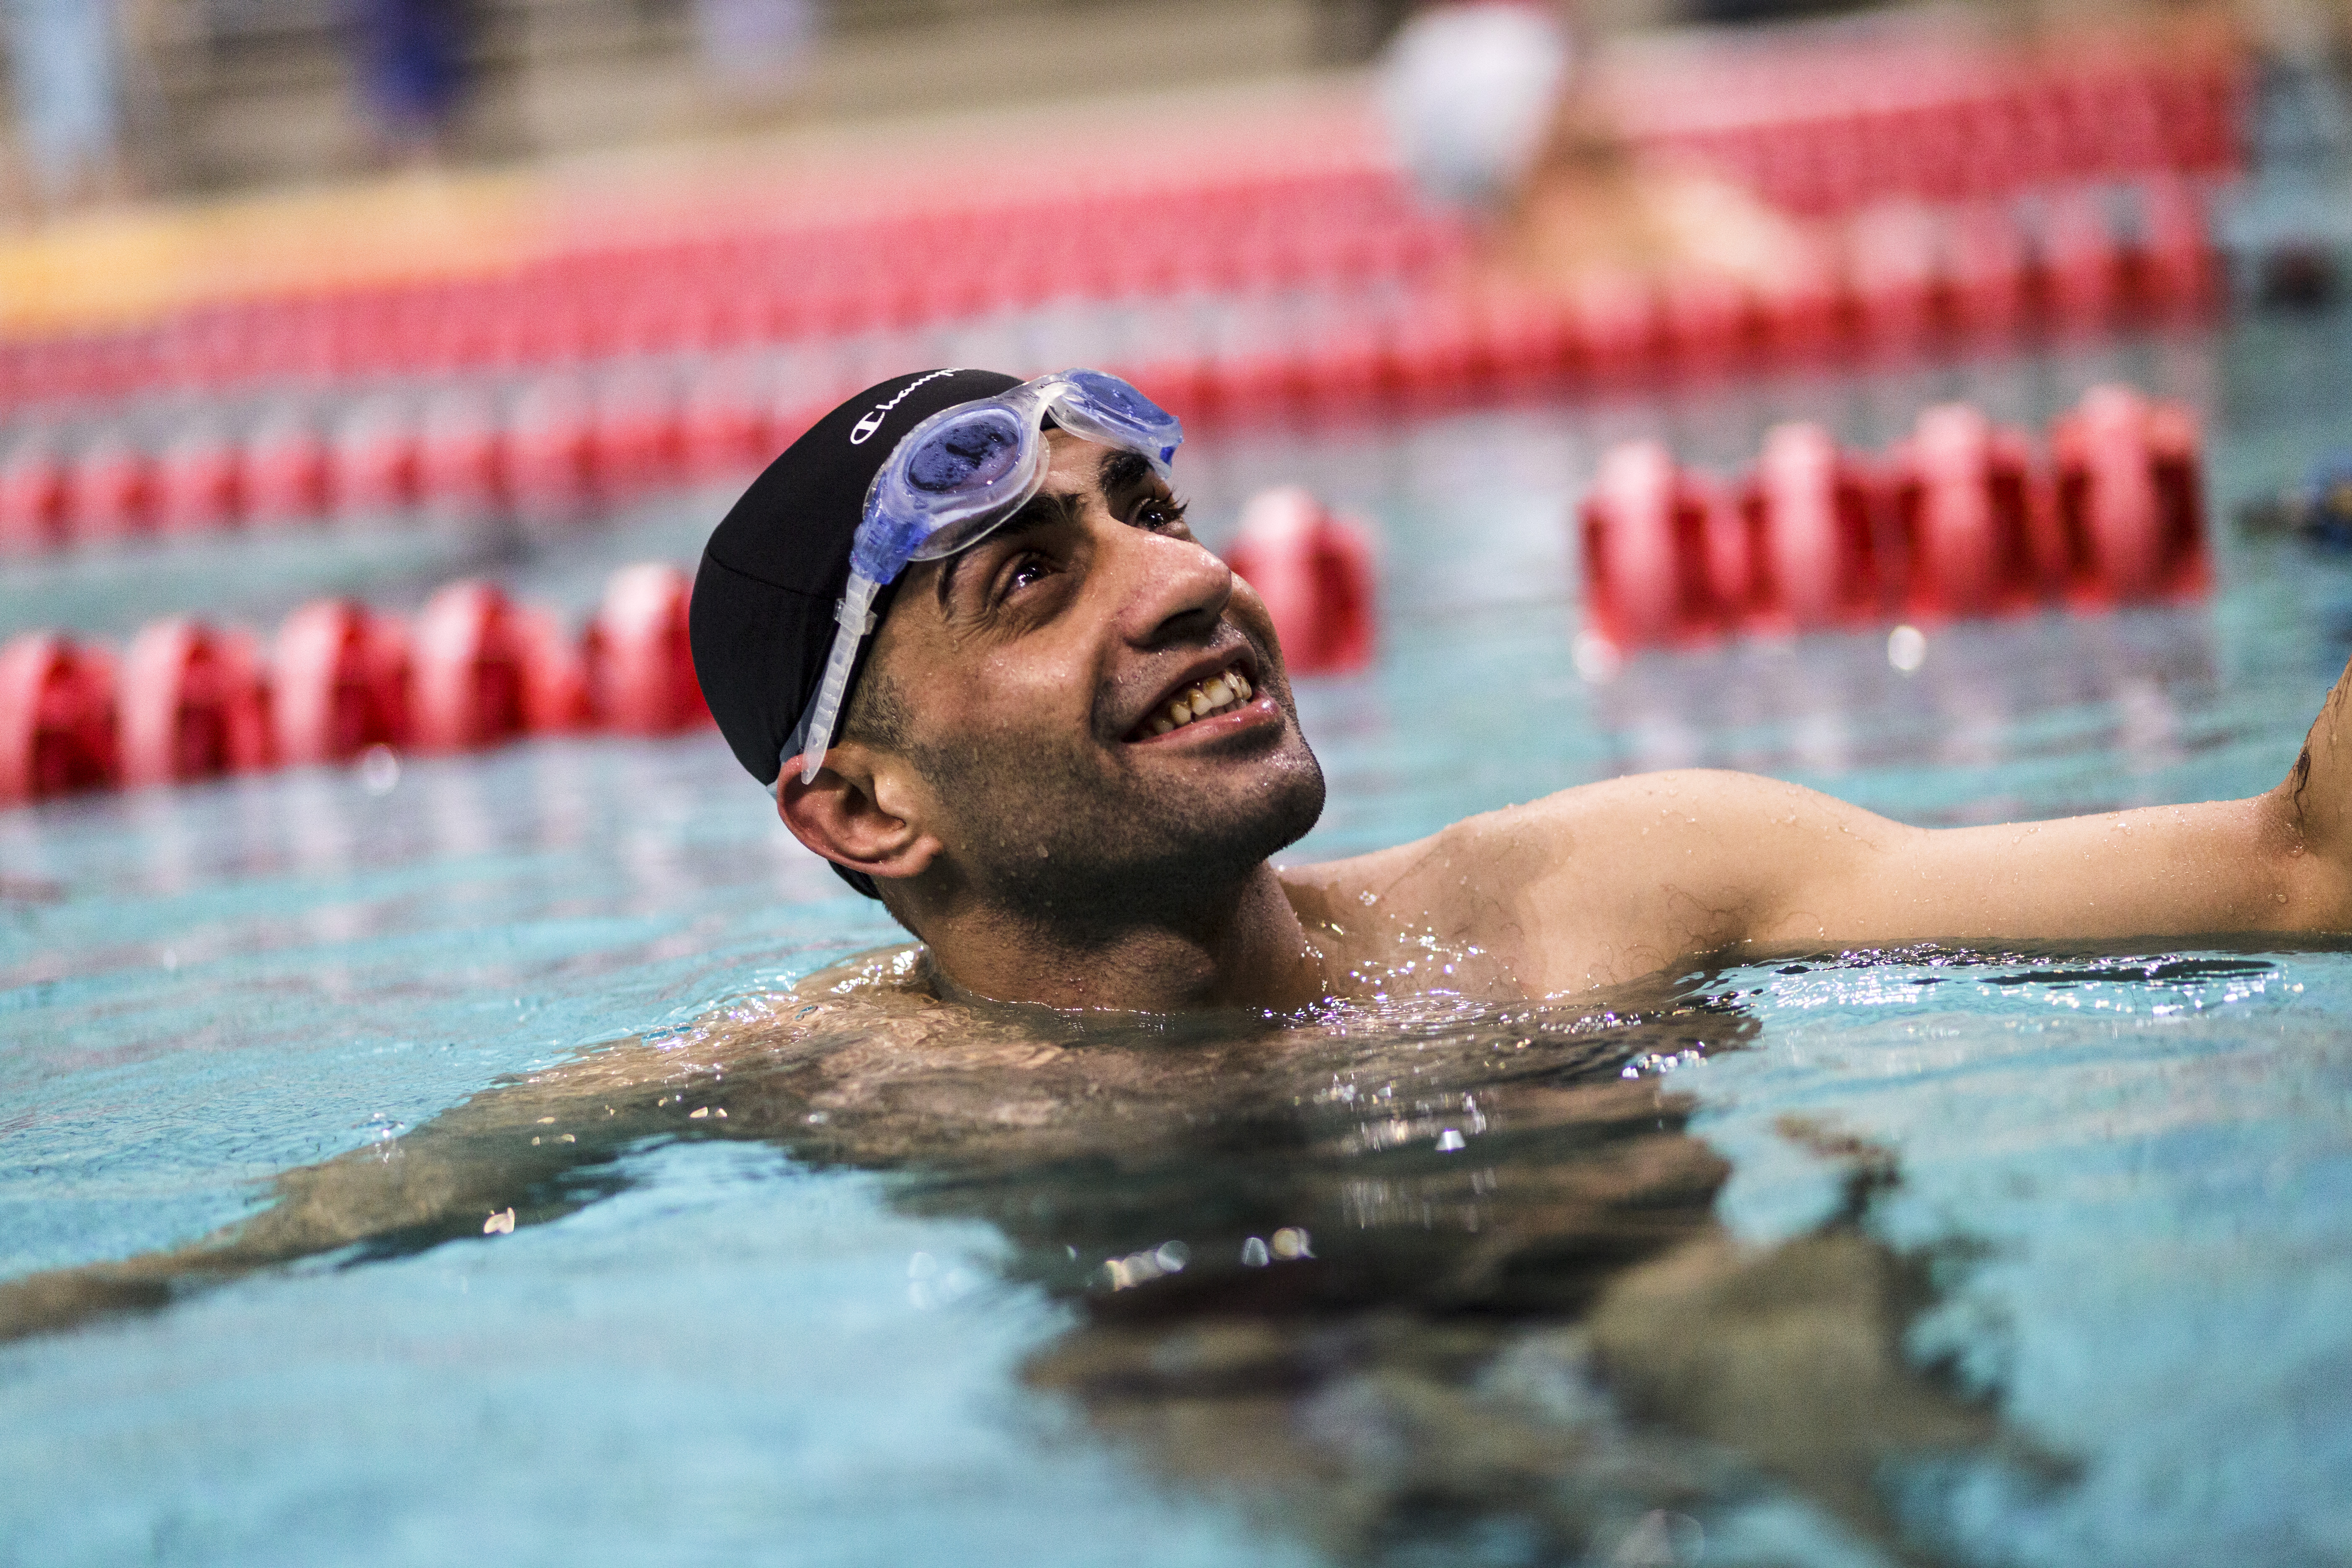 Ibrahim al-Hussein, a 27 year old refugee from Syria, during a swimming training session in the former 2004 Olympic sport complex in Athens. ; Ibrahim al-Hussein will carry the Olympic Flame in Athens as part of the torch relay for the 2016 Games in Rio de Janeiro.
The symbolic gesture is meant to show solidarity with the worlds refugees at a time when millions are fleeing war and persecution worldwide and an its an immense privilege for the a 27 year old refugee from Syria who once dreamed of competing in the Olympics and whose athletic career was interrupted by the war and an injury that cost him part of his right leg after a bombing in his home town of Deir ez-Zor.
"It is an honor," Ibrahim says of bearing the Olympic flame. "Imagine achieving one of your biggest dreams. Imagine that your dream of more than 20 years is becoming a reality."  
Ibrahim commits himself to a rigorous training schedule. Three days per week, He swims with ALMA, a Greek nonprofit organization for athletes with disabilities. His training is held in the former 2004 Olympic sport complex in Athens. He is also part of a wheelchair basketball league that meets five times per week and travels throughout the country for games. 
Ibrahim does all this despite working a 10-hour overnight shift at a cafe in Anthoupoli, an Athens suburb 30 minutes by train from his home. 
"It's not just a game for me," Ibrahim says of his commitment to athletics. "It's my life."